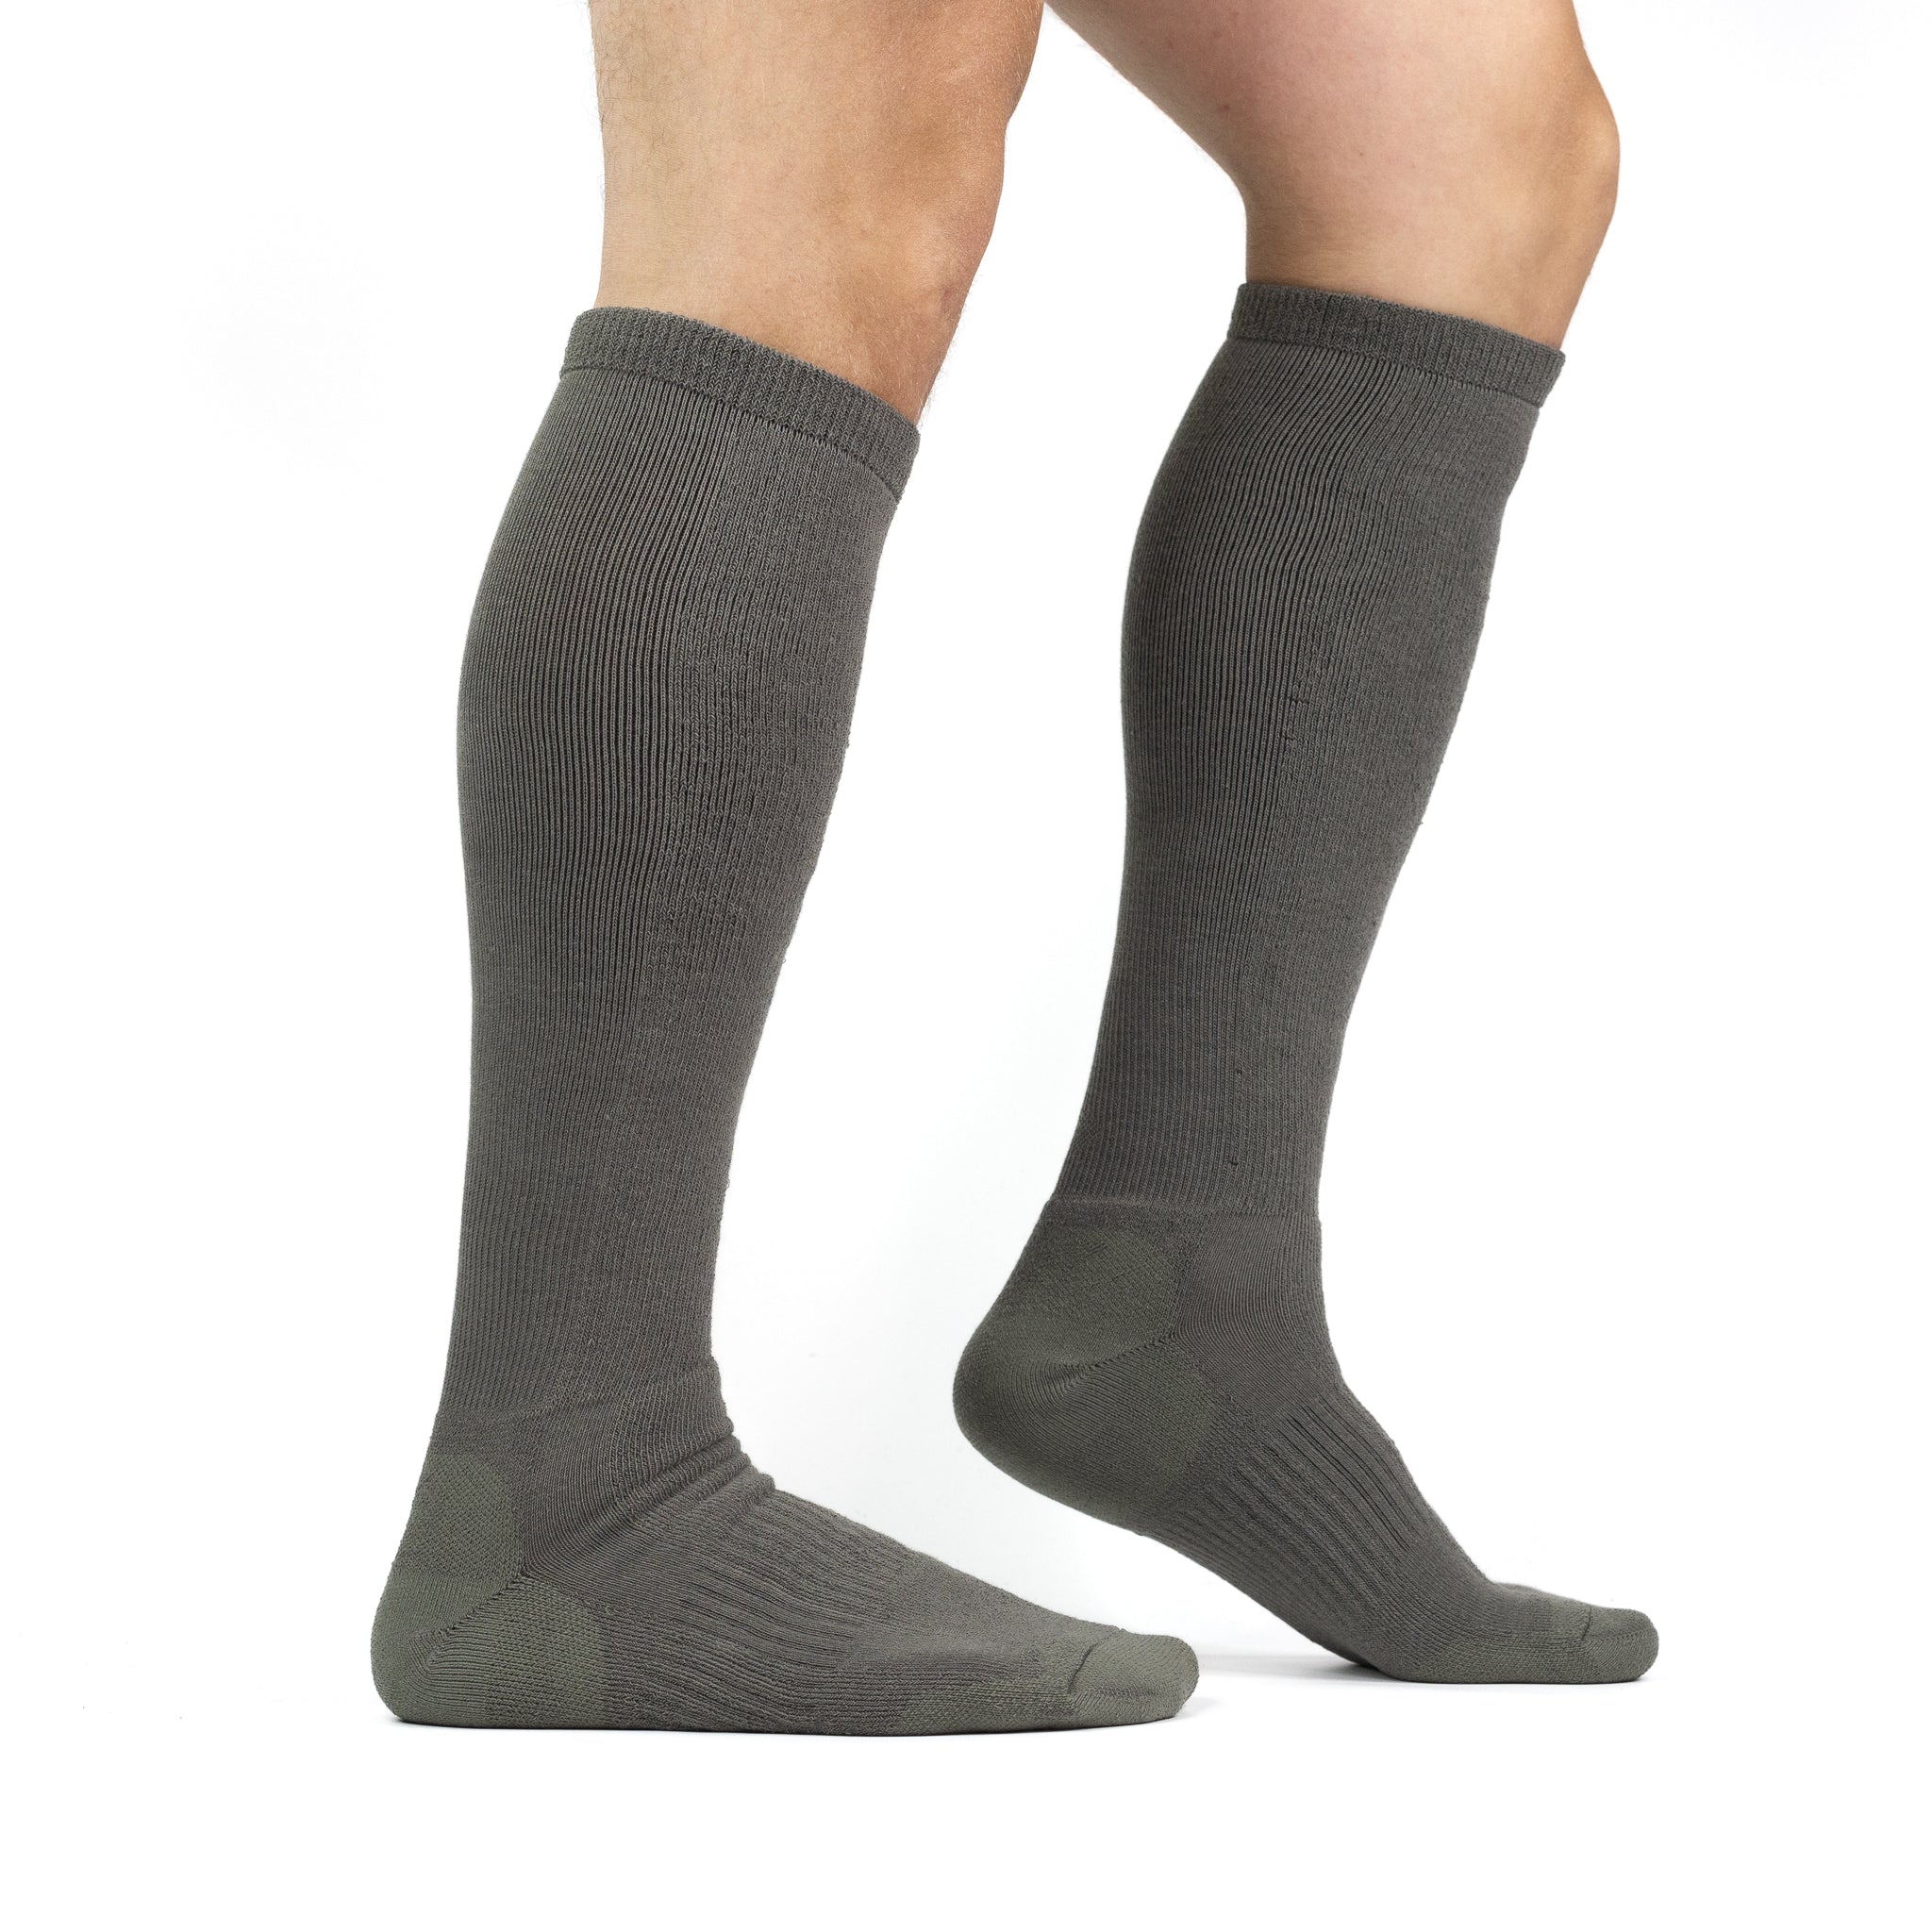 Fatigue Fighter - Lightweight Sock Over-the-Calf Military River Fox